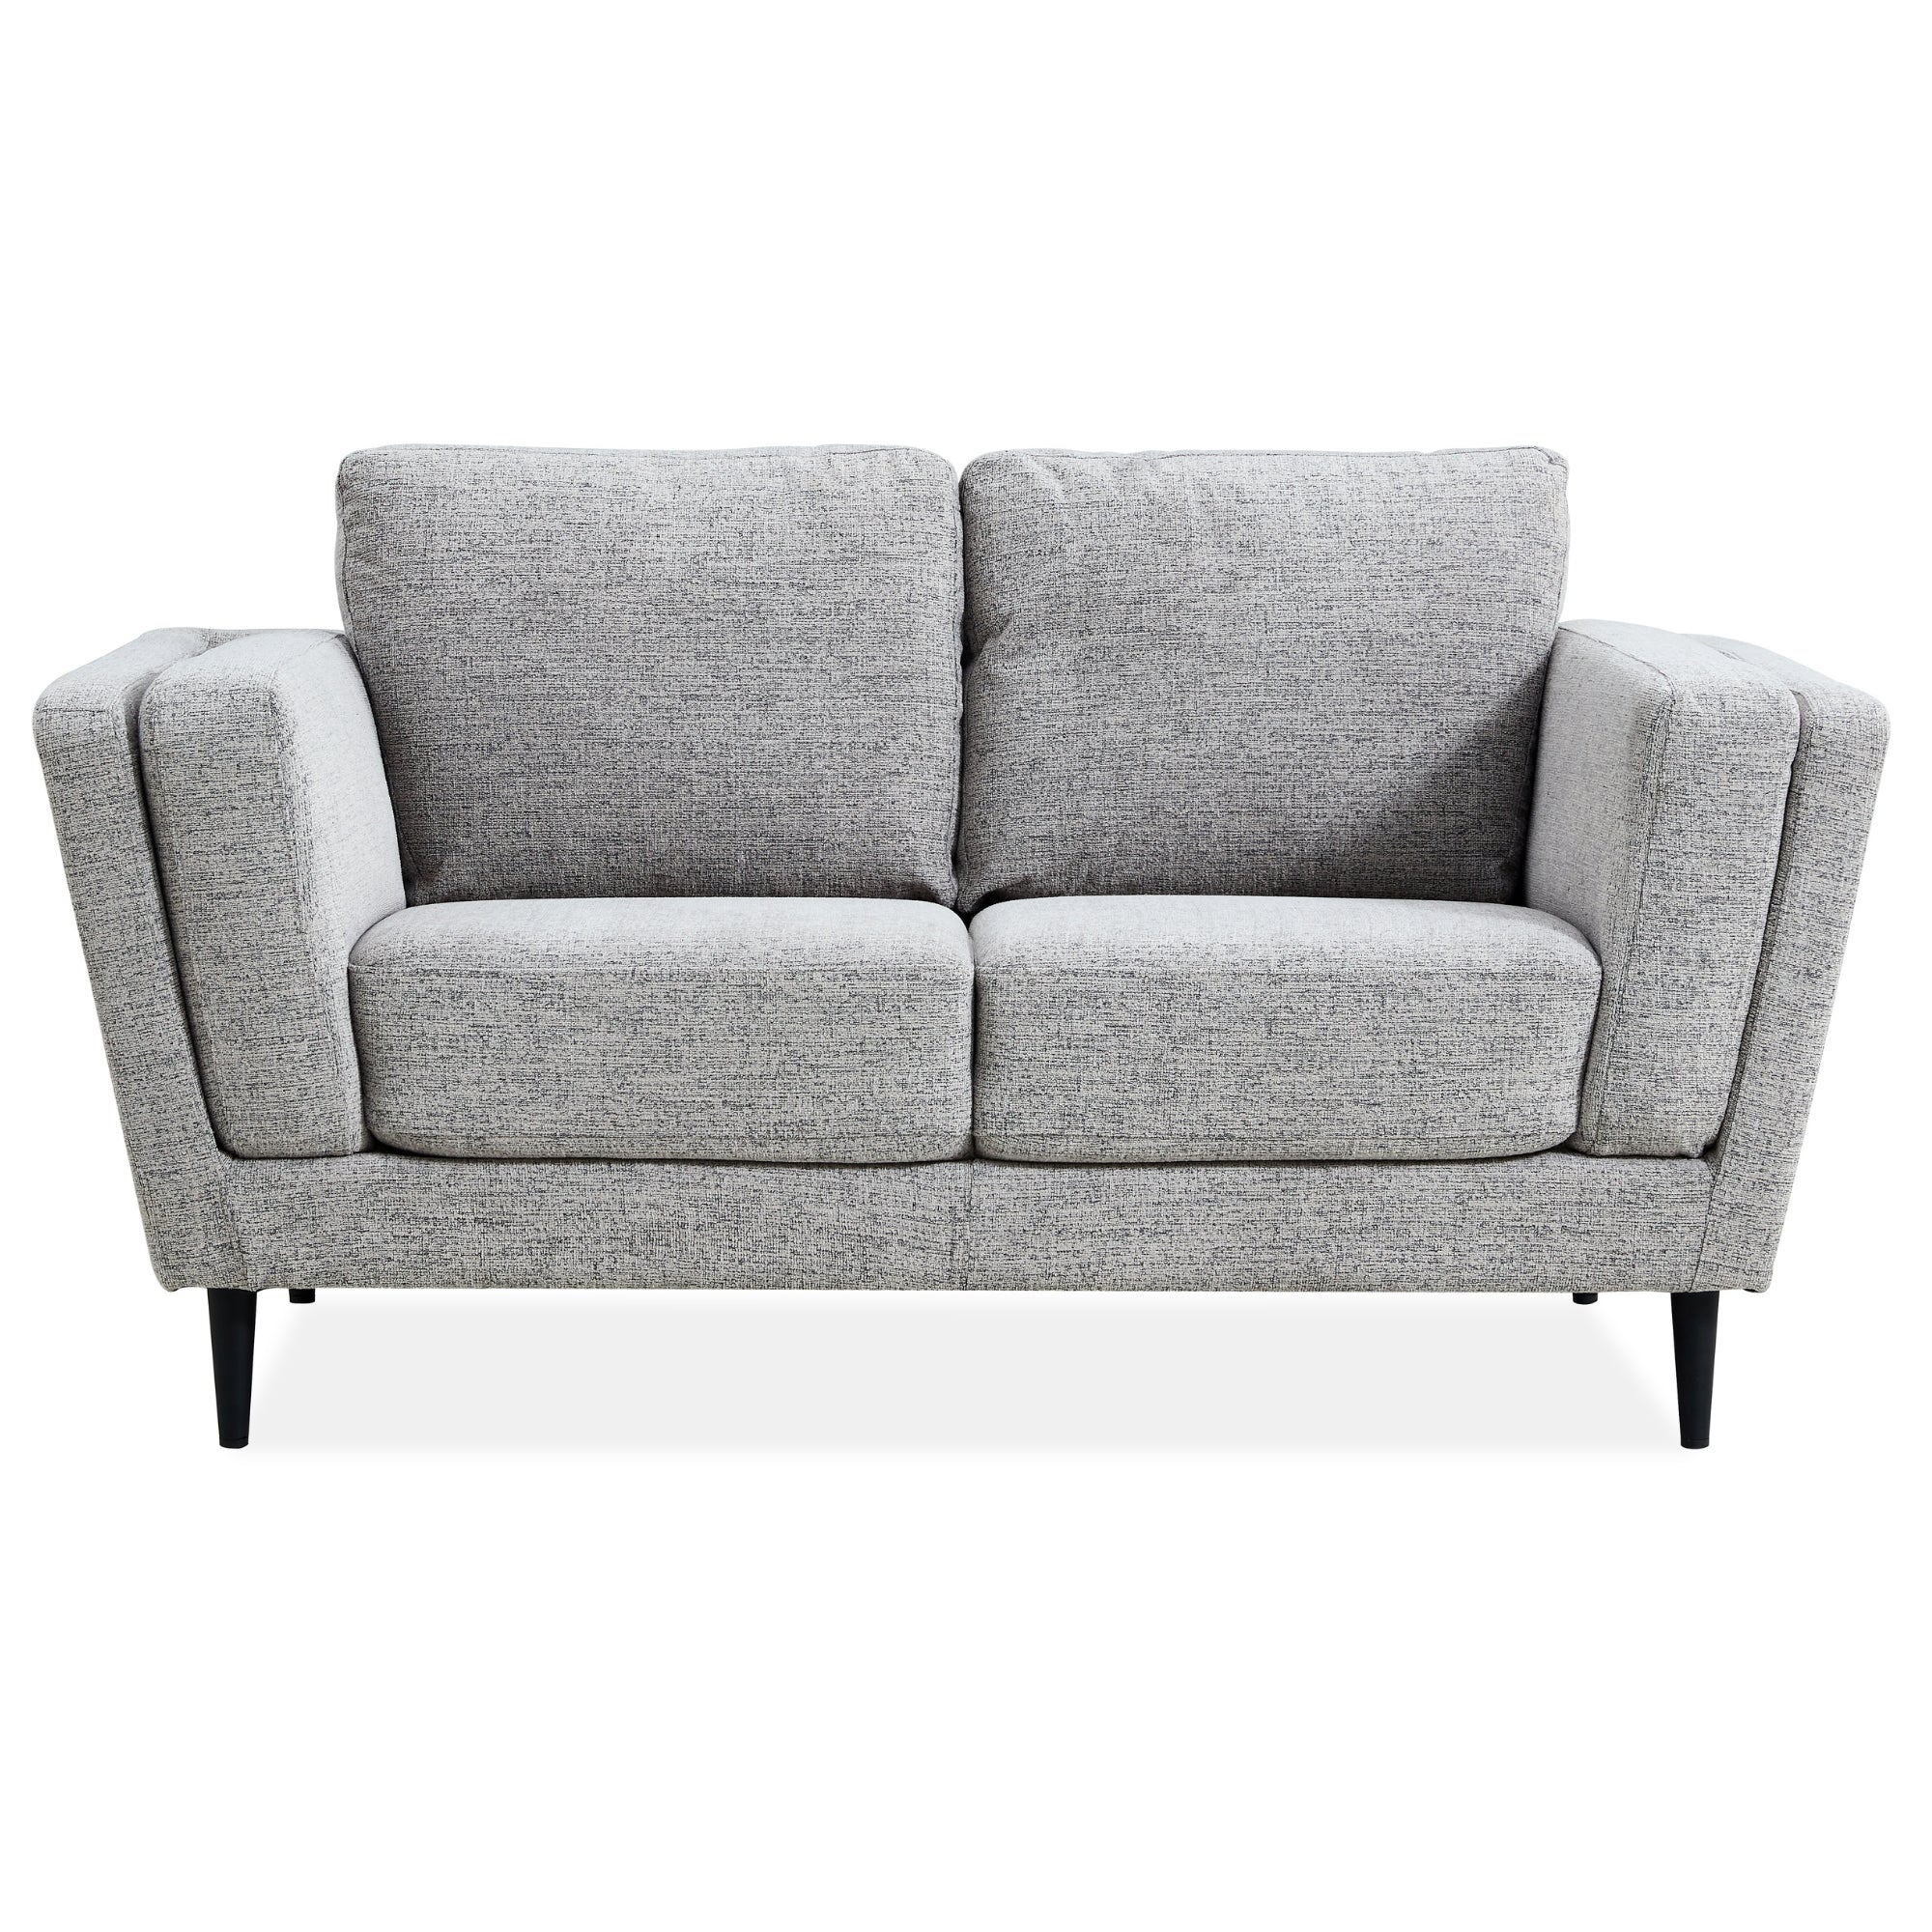 Durable 2-Seater Fabric Sofa with Steel Frame - Pepper